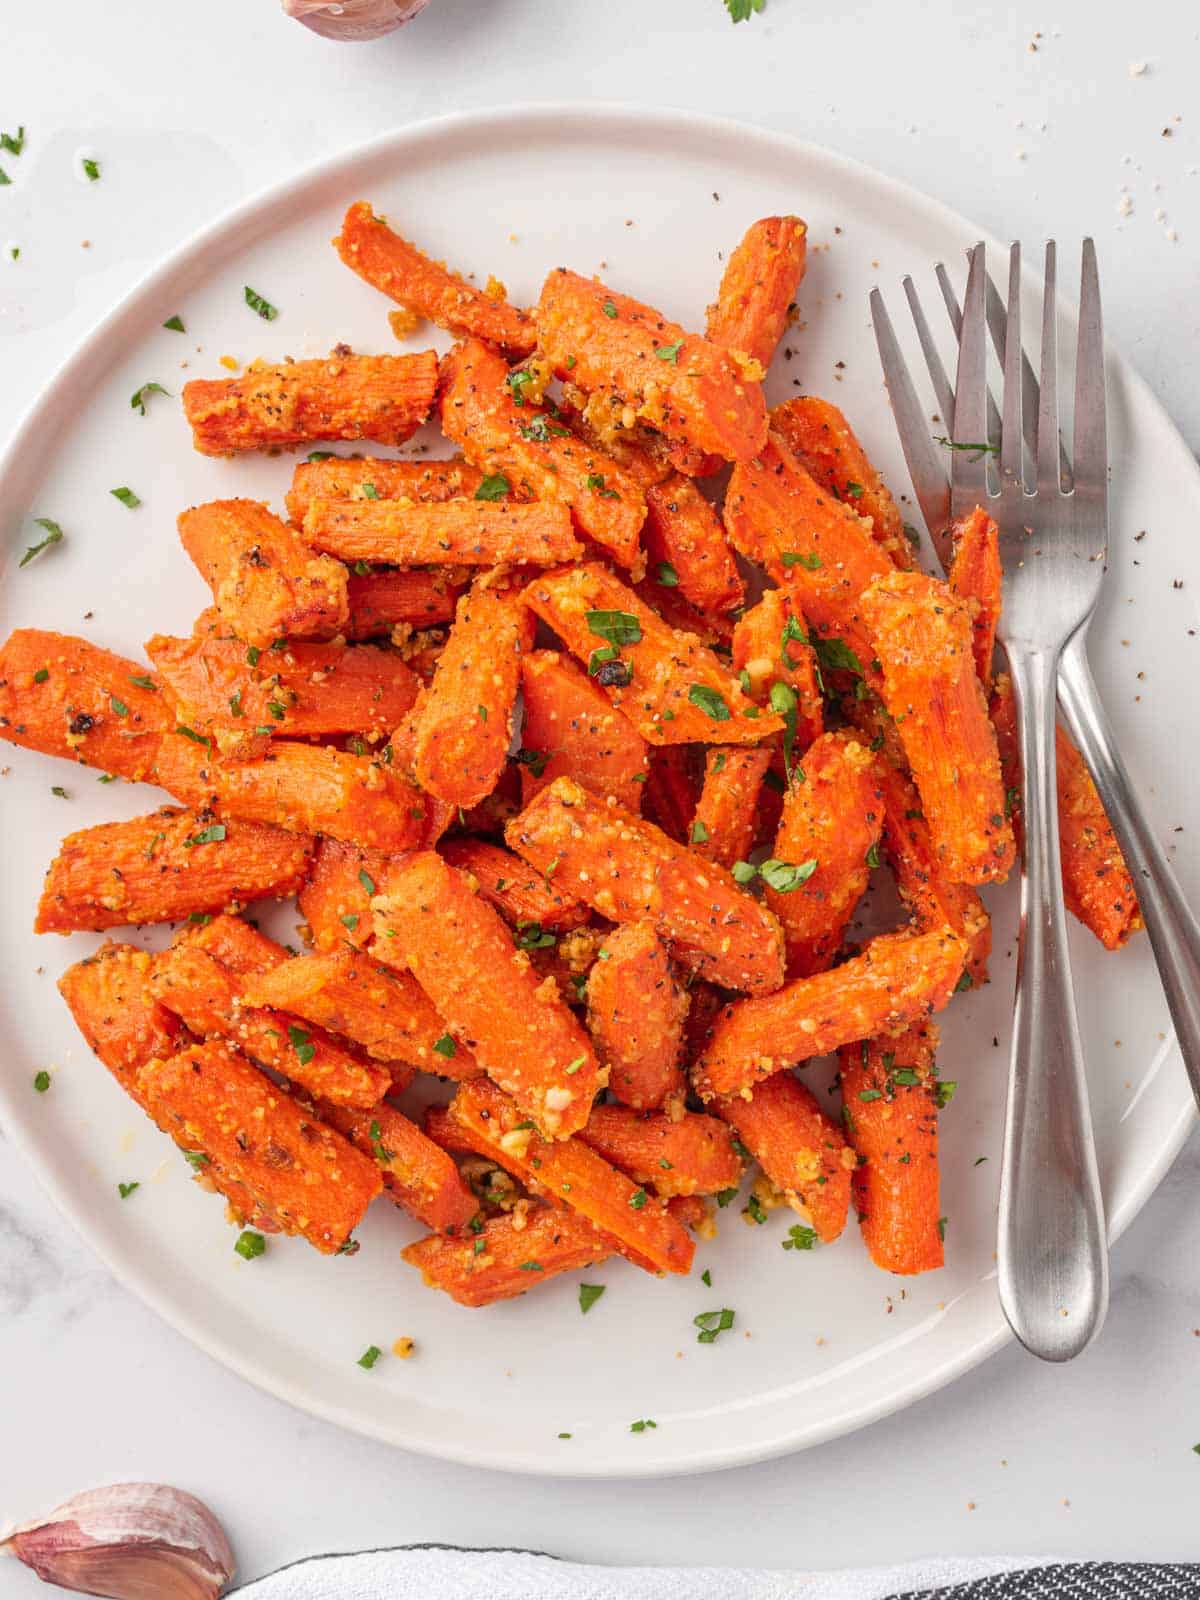 roasted carrots with parmesan cheese on a plate with two forks.